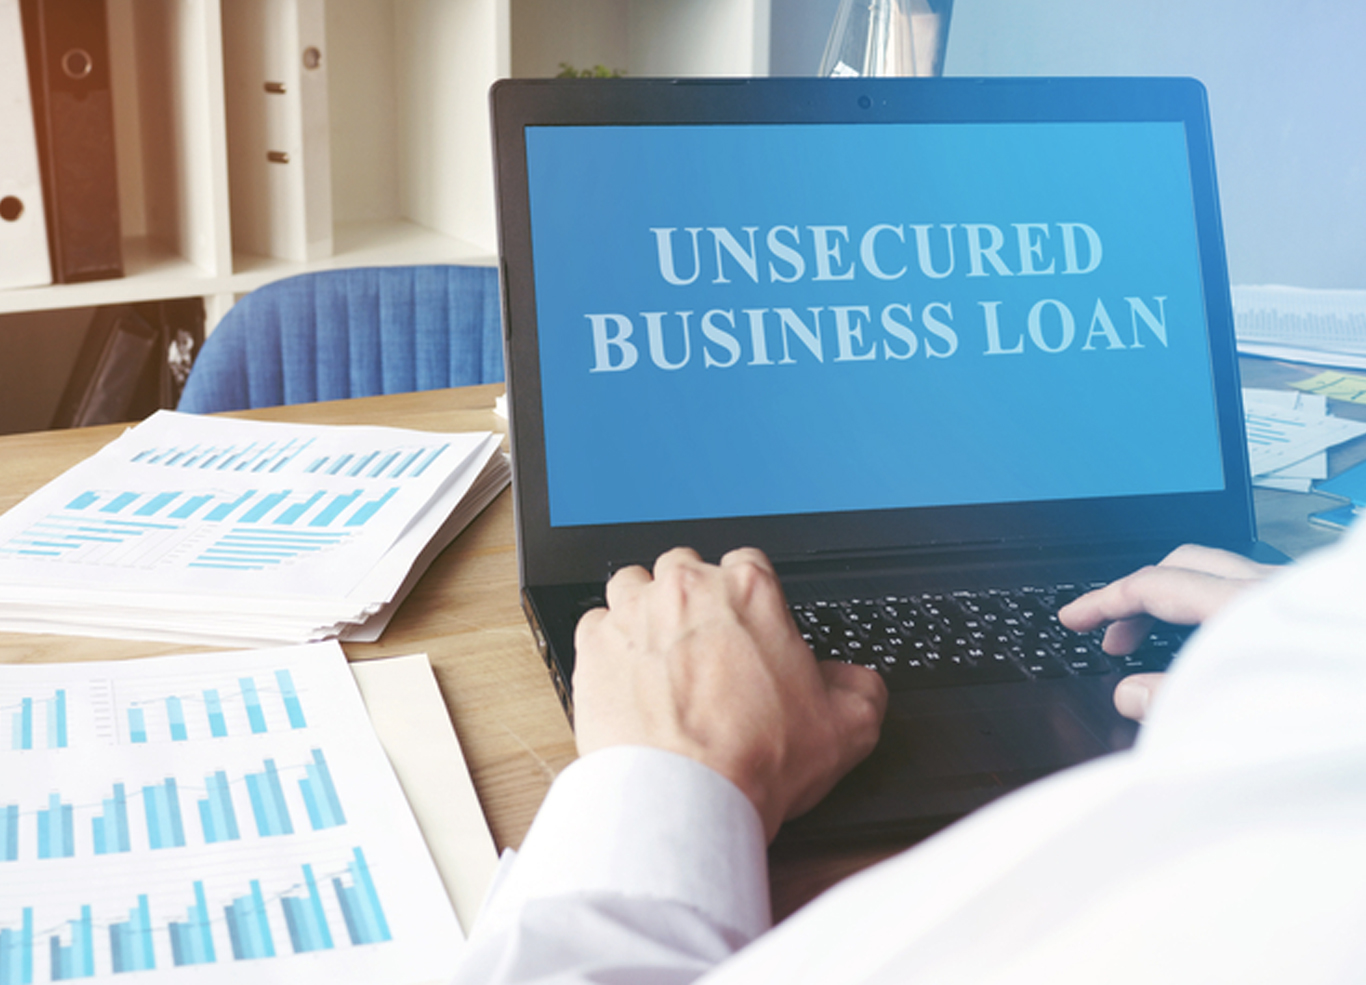 Top Reasons for Choosing Unsecured Business Loan